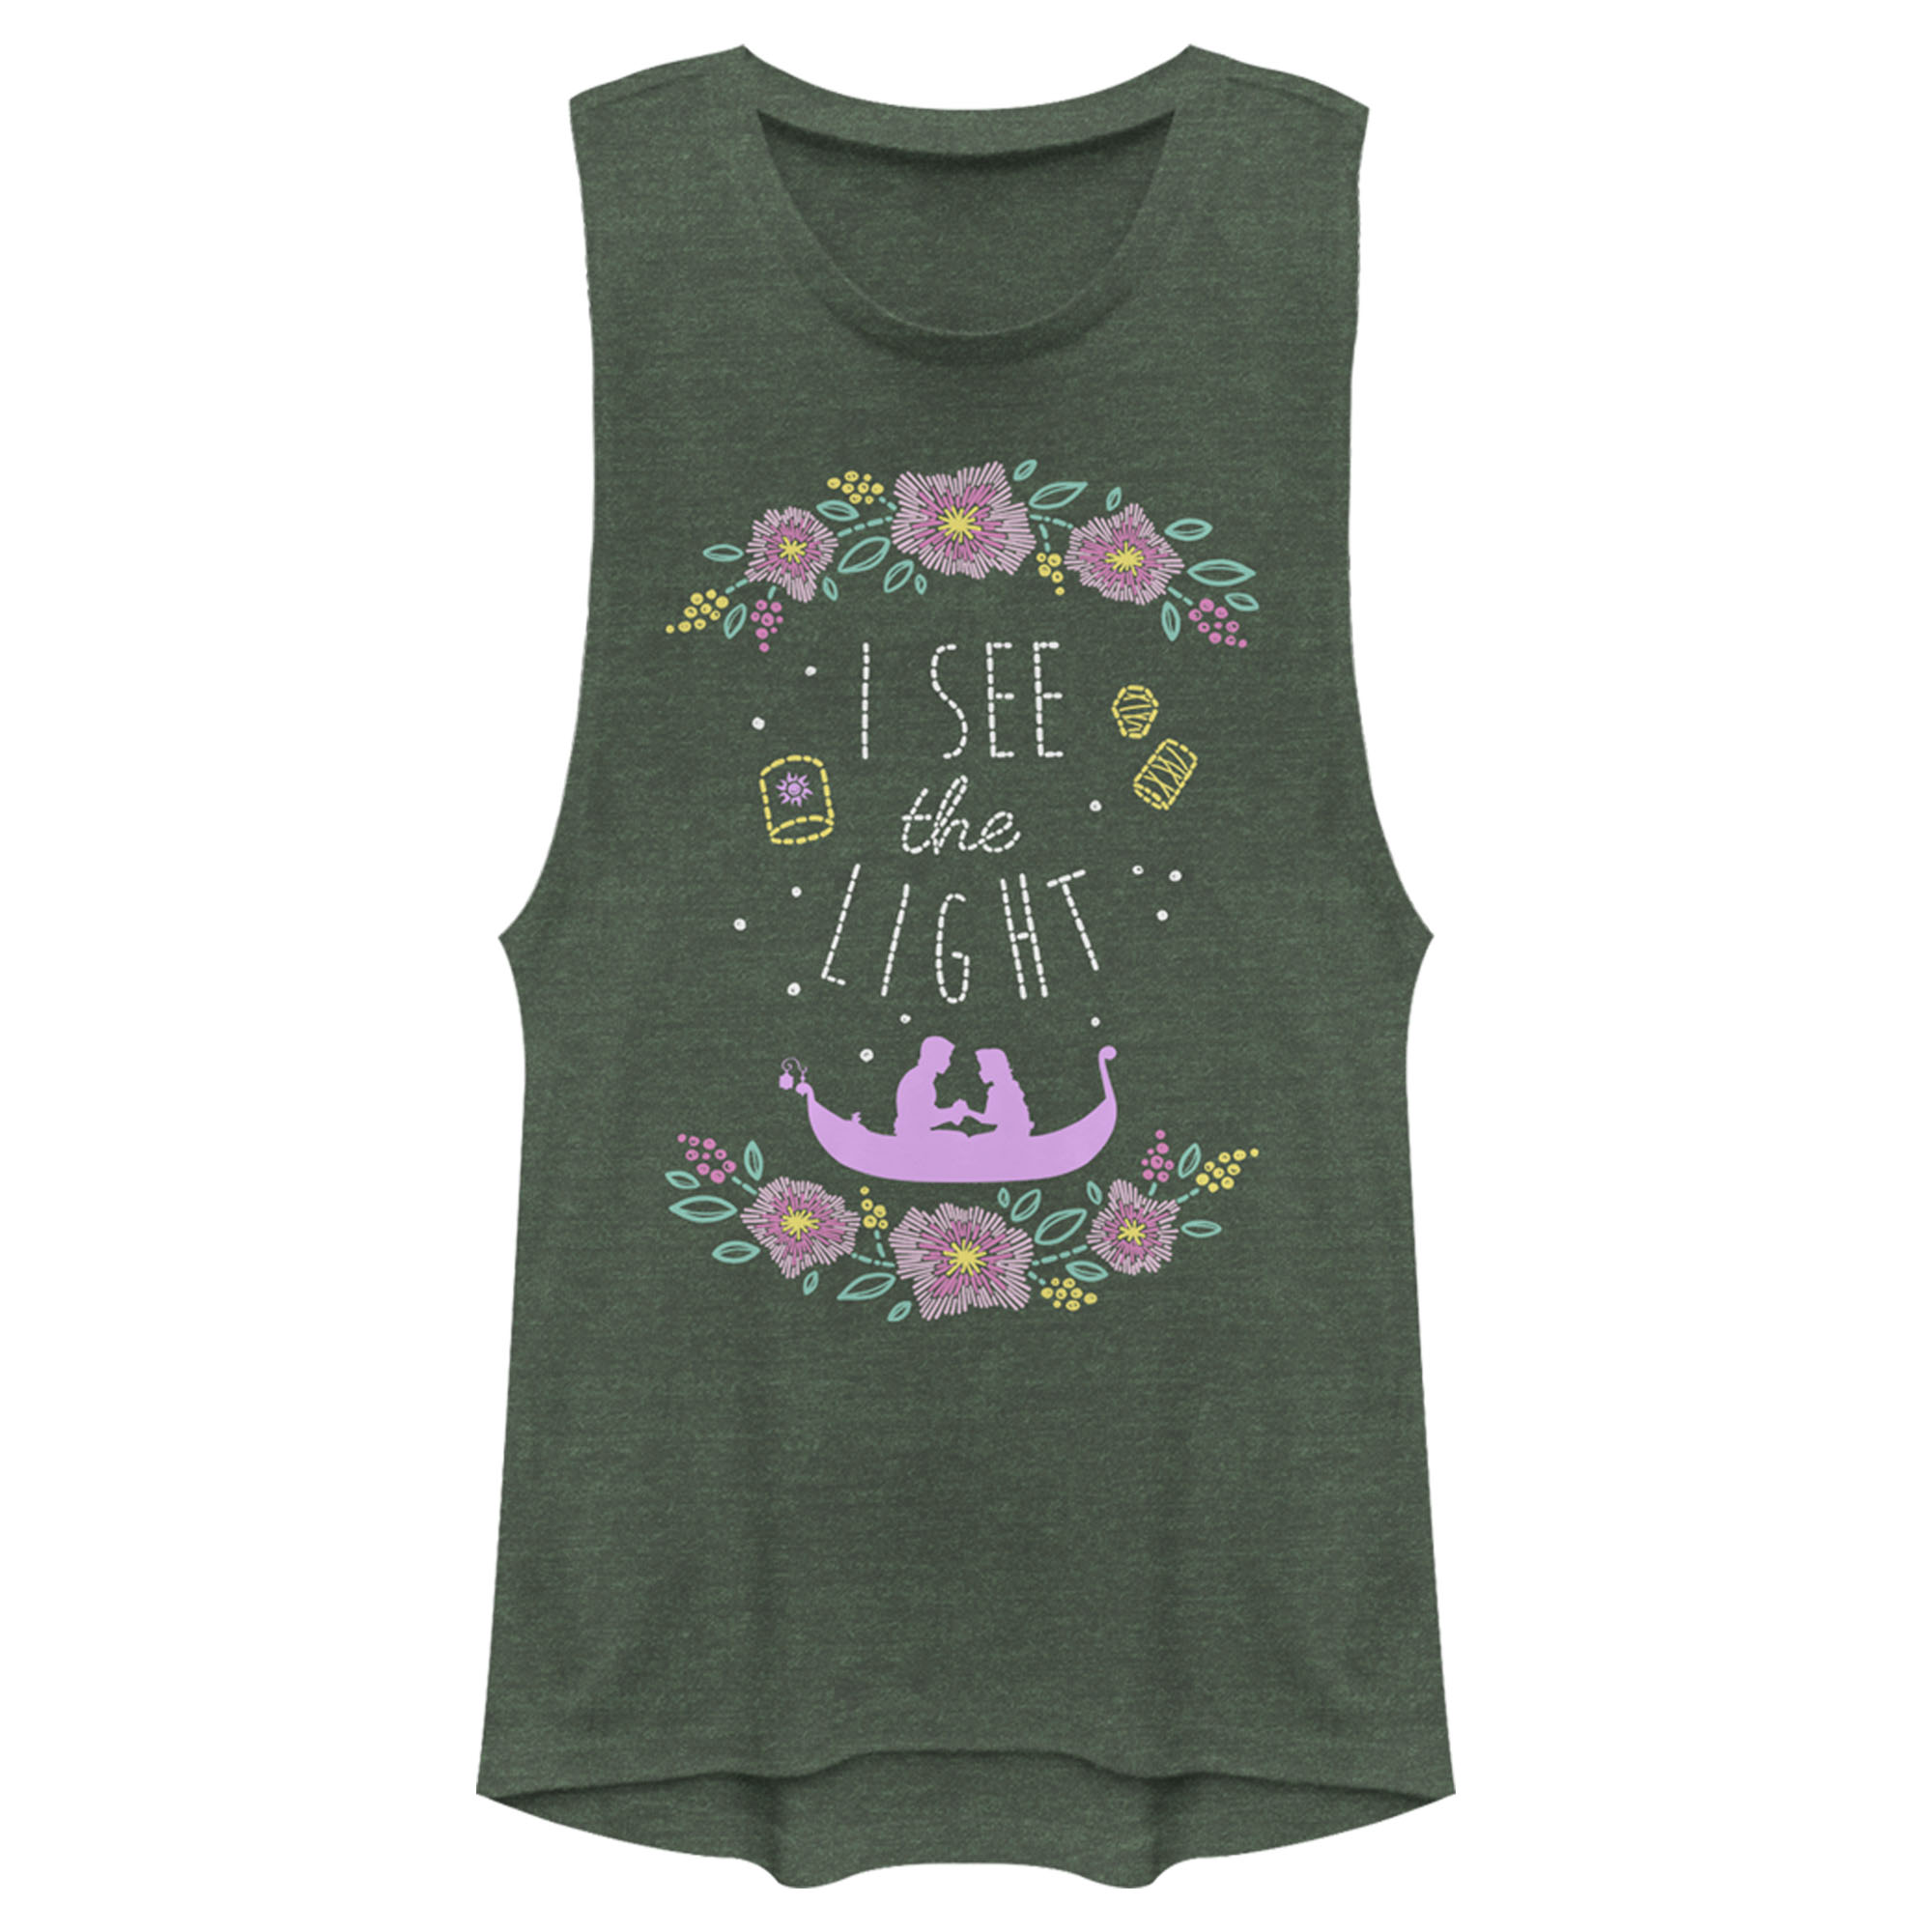 Tangled Junior's Tangled Rapunzel and Flynn I see the Light  Festival Muscle Graphic Tee